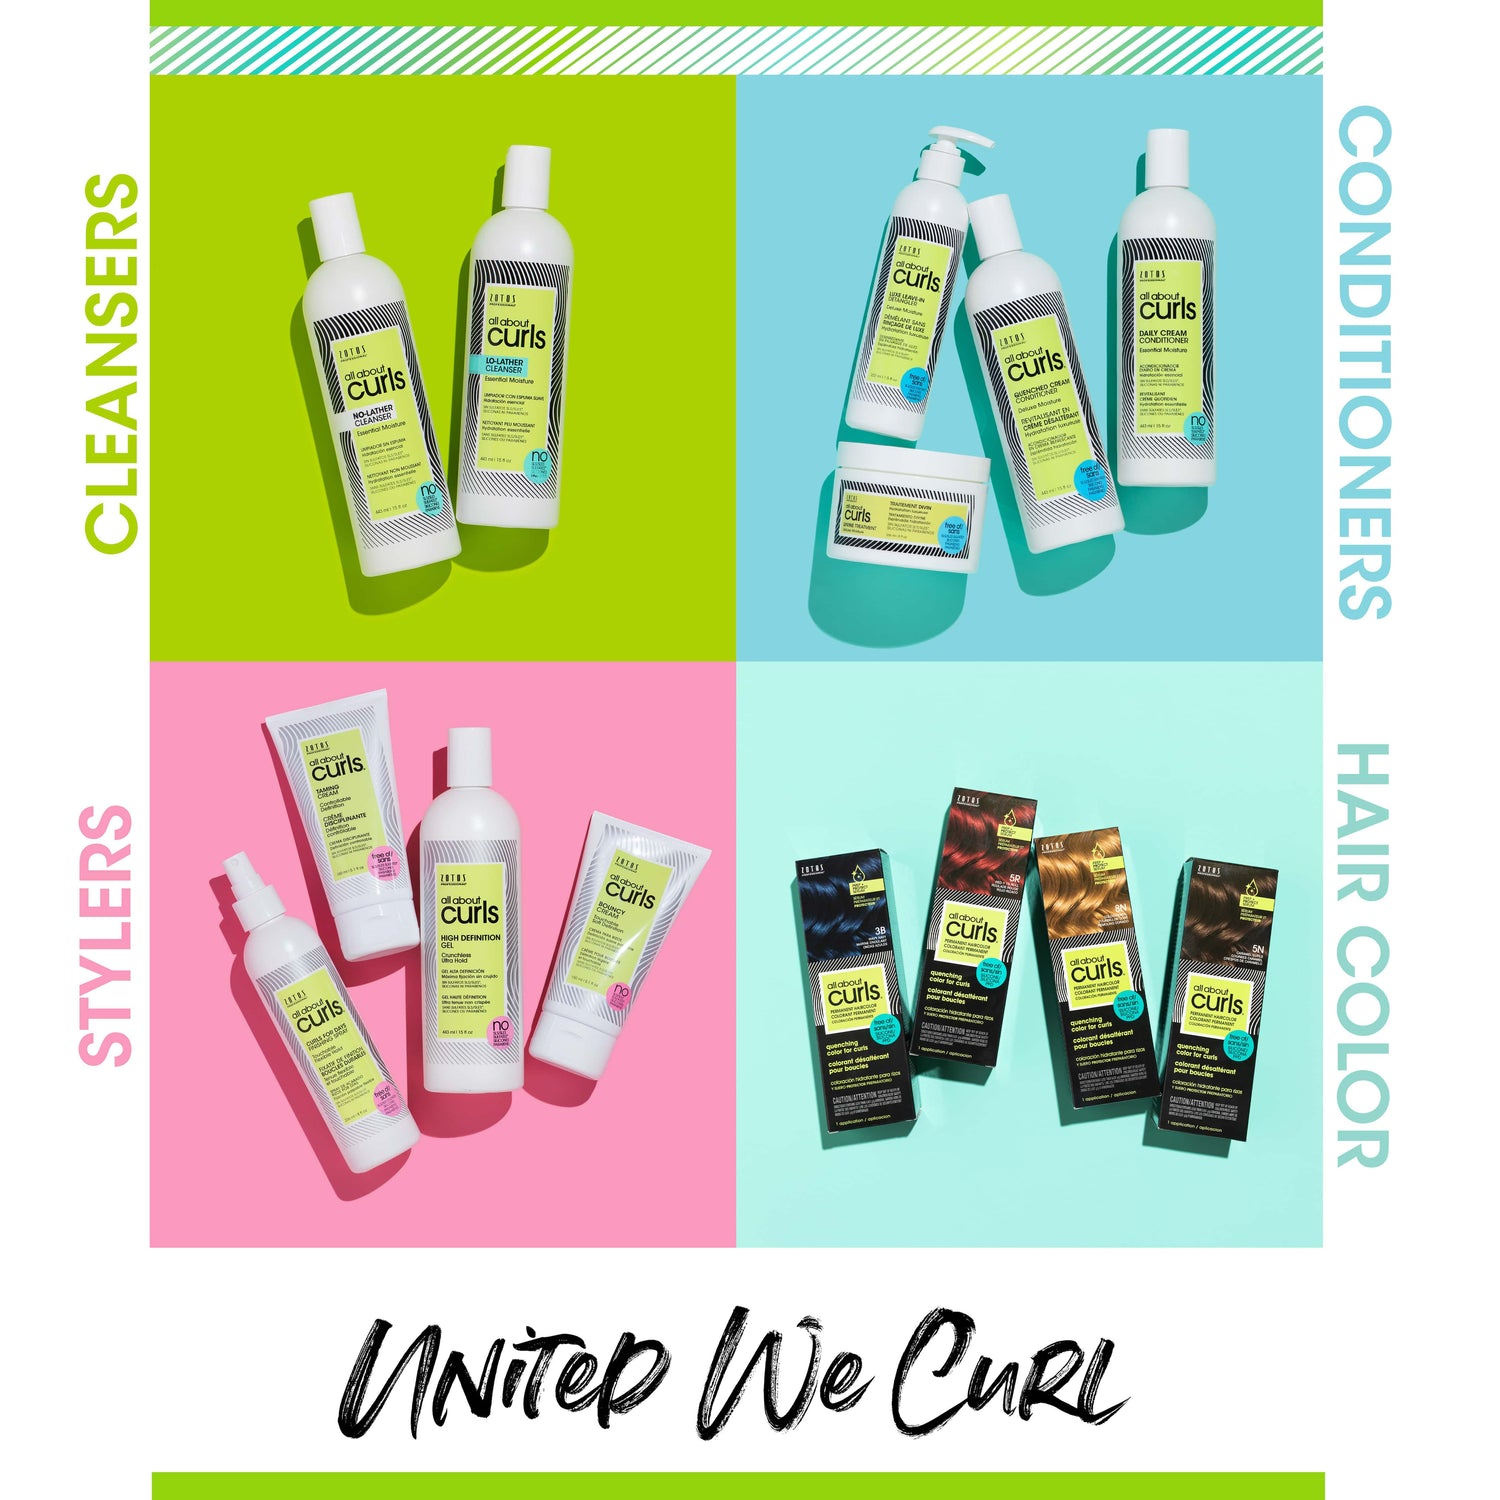 All About Curls® No Lather Cleanser